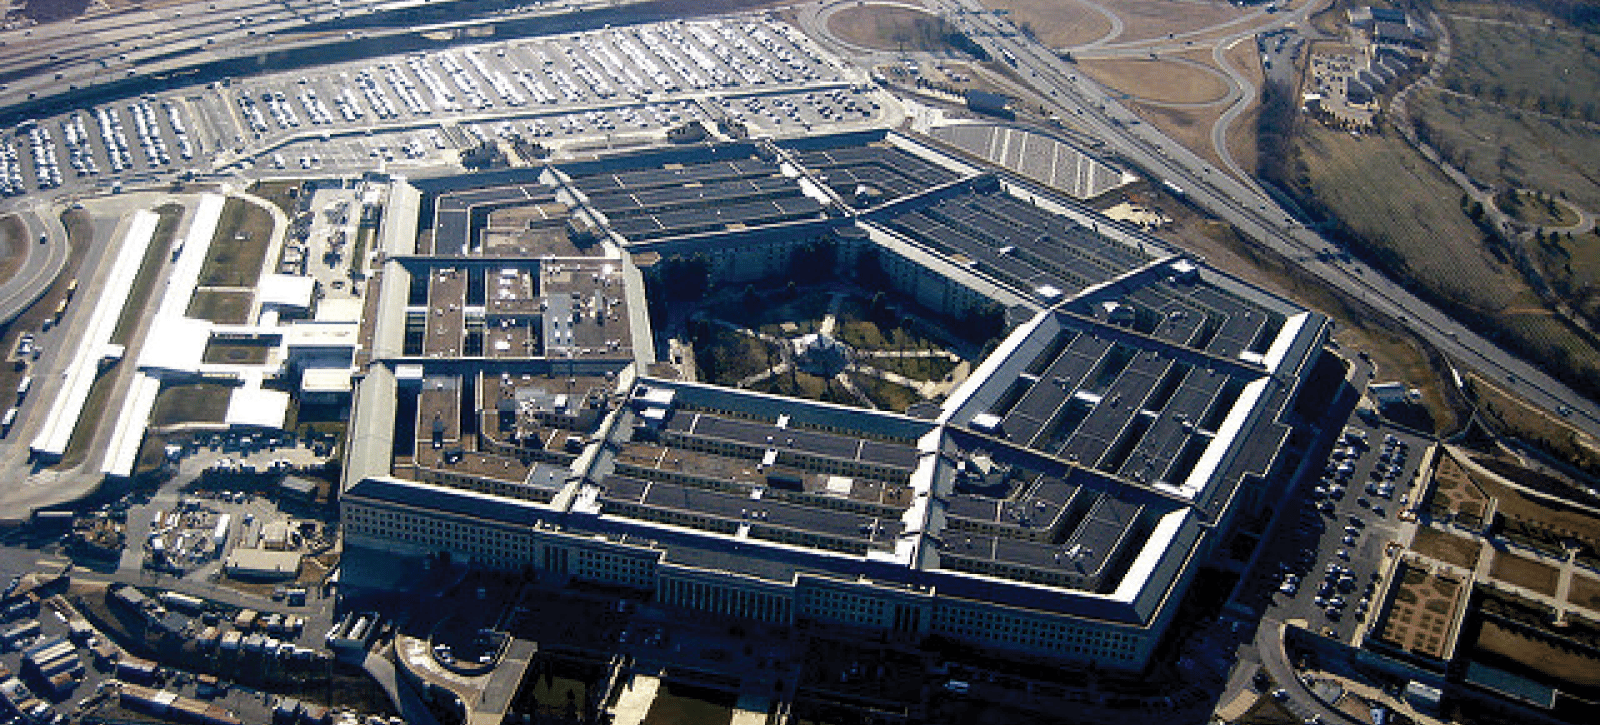 Why Can't the Pentagon Pass An Audit?